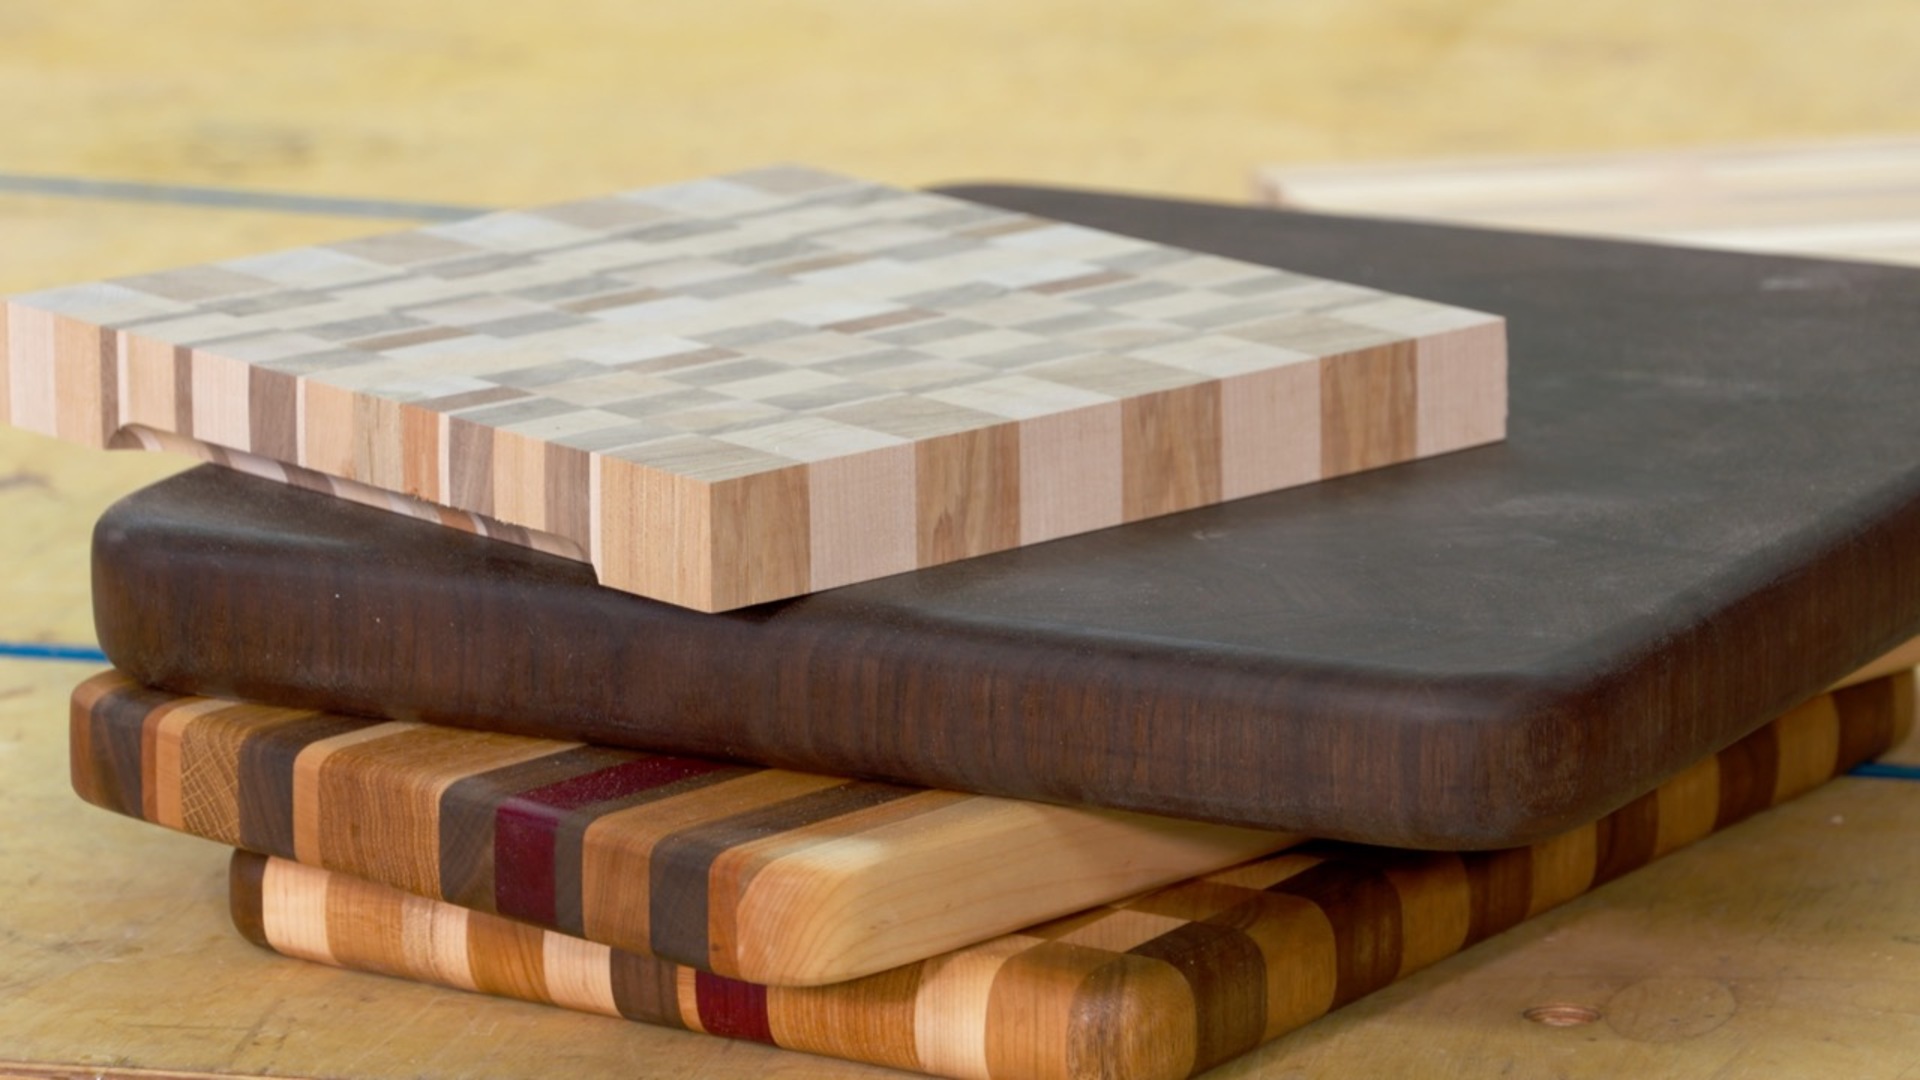 How to Make a Wooden Cutting Board: Free Tutorial